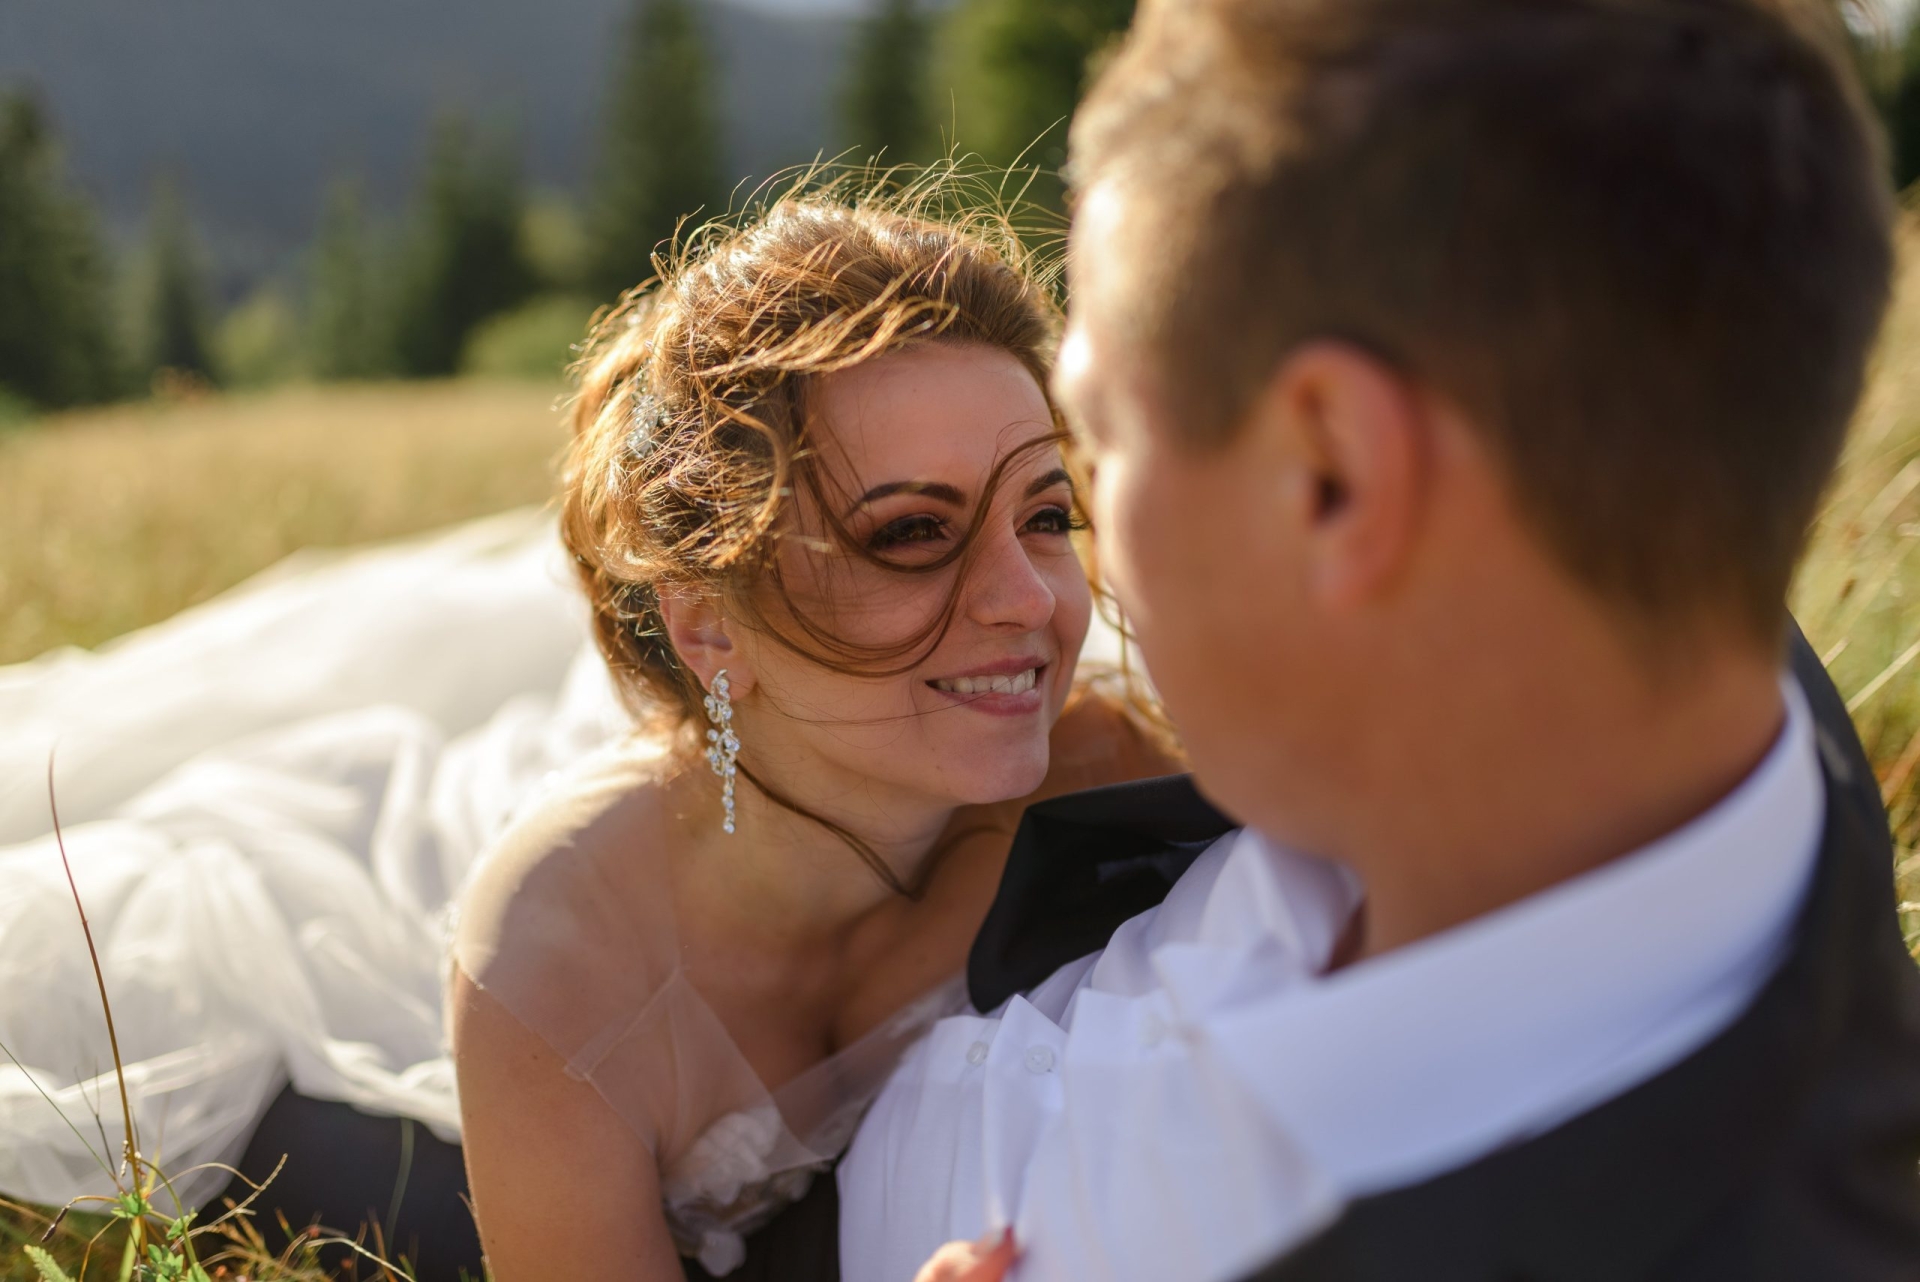 wedding photography in the mountains newlyweds ar 2021 09 02 01 33 49 utc min scaled